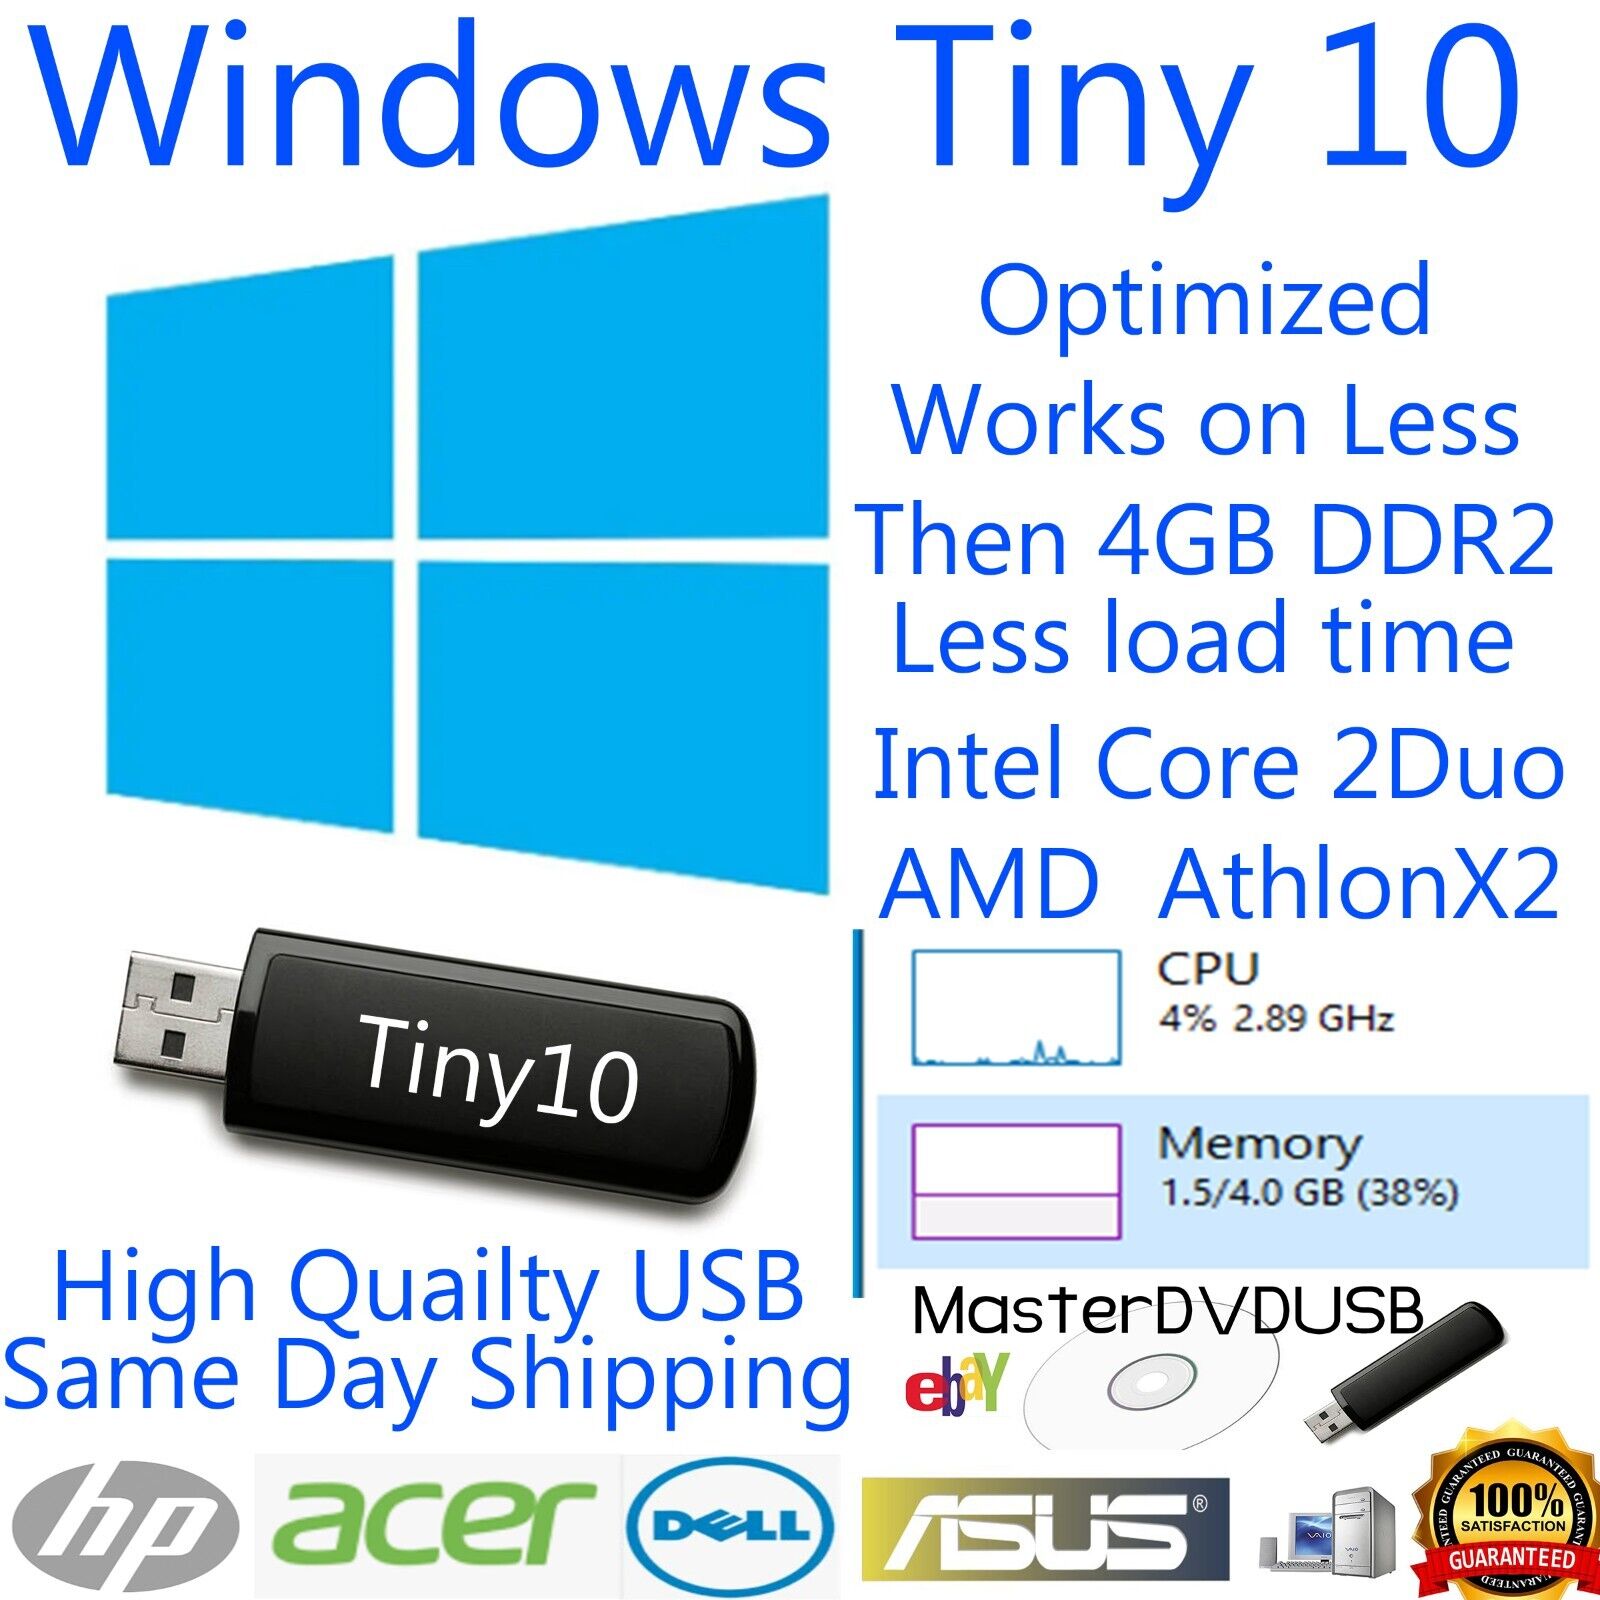 Windows Tiny 10 Bootable USB Installer For Gamers And Older Computers